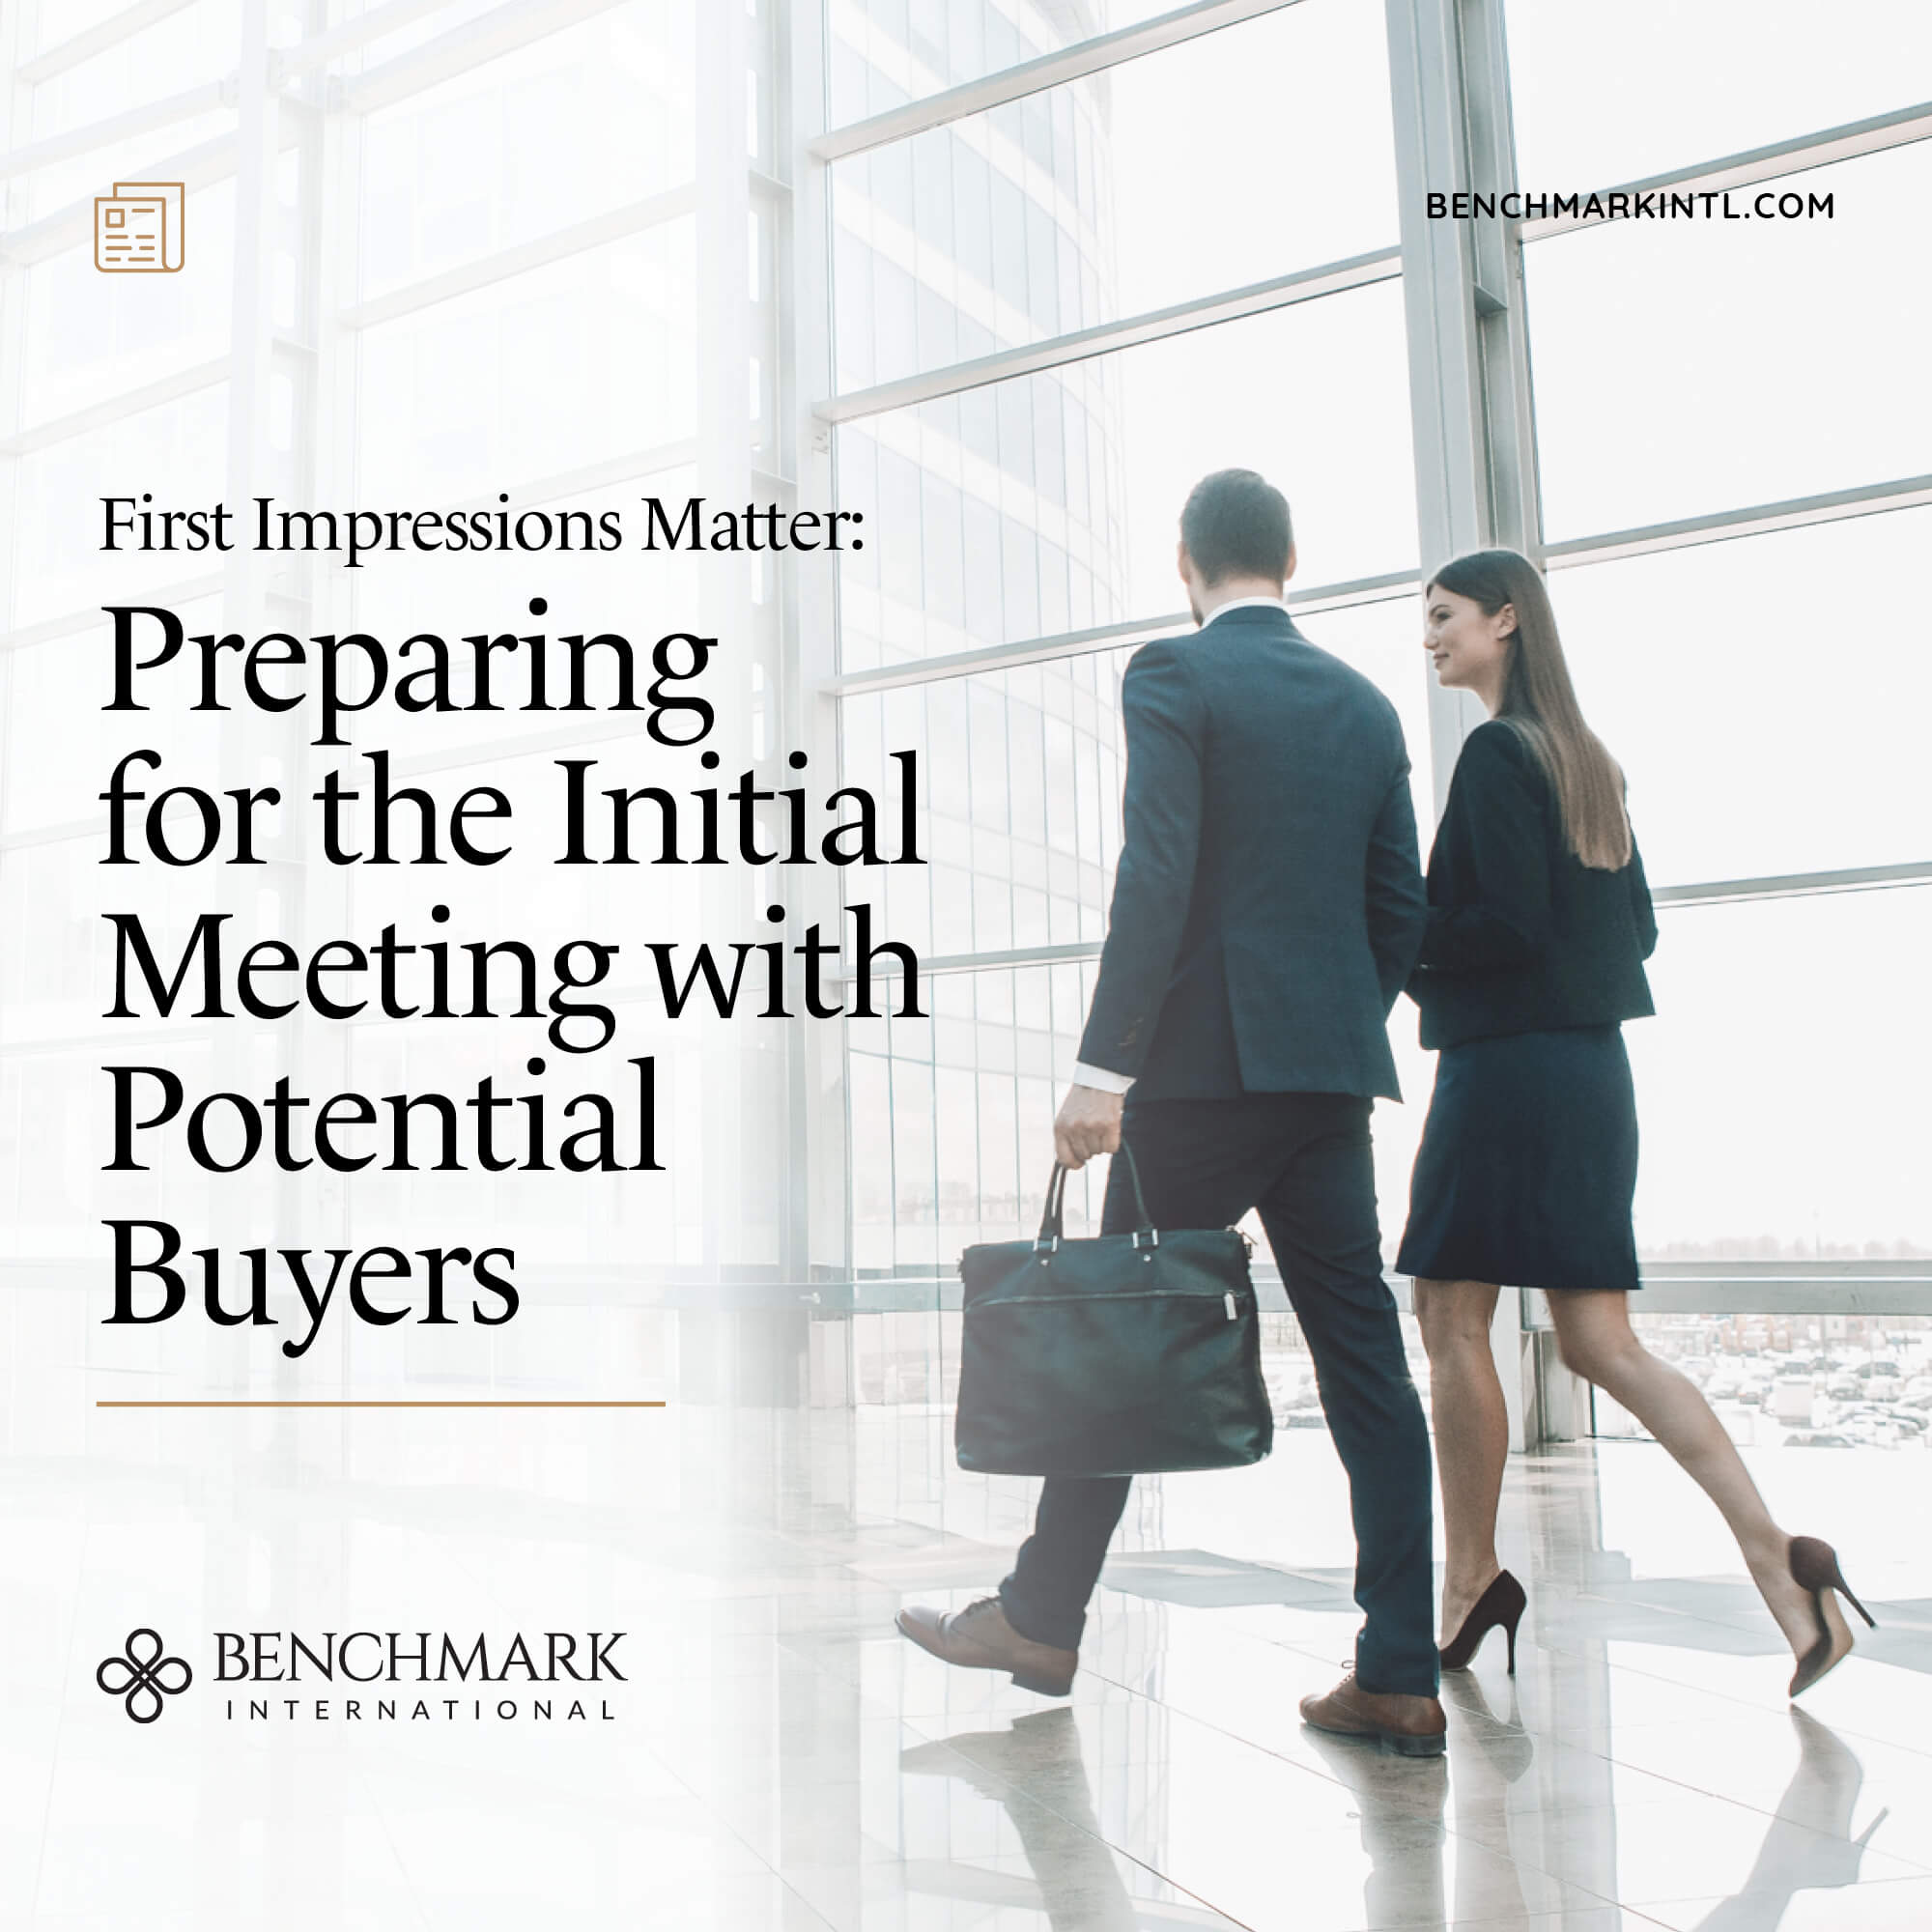 Preparing for initial meeting with potential buyers